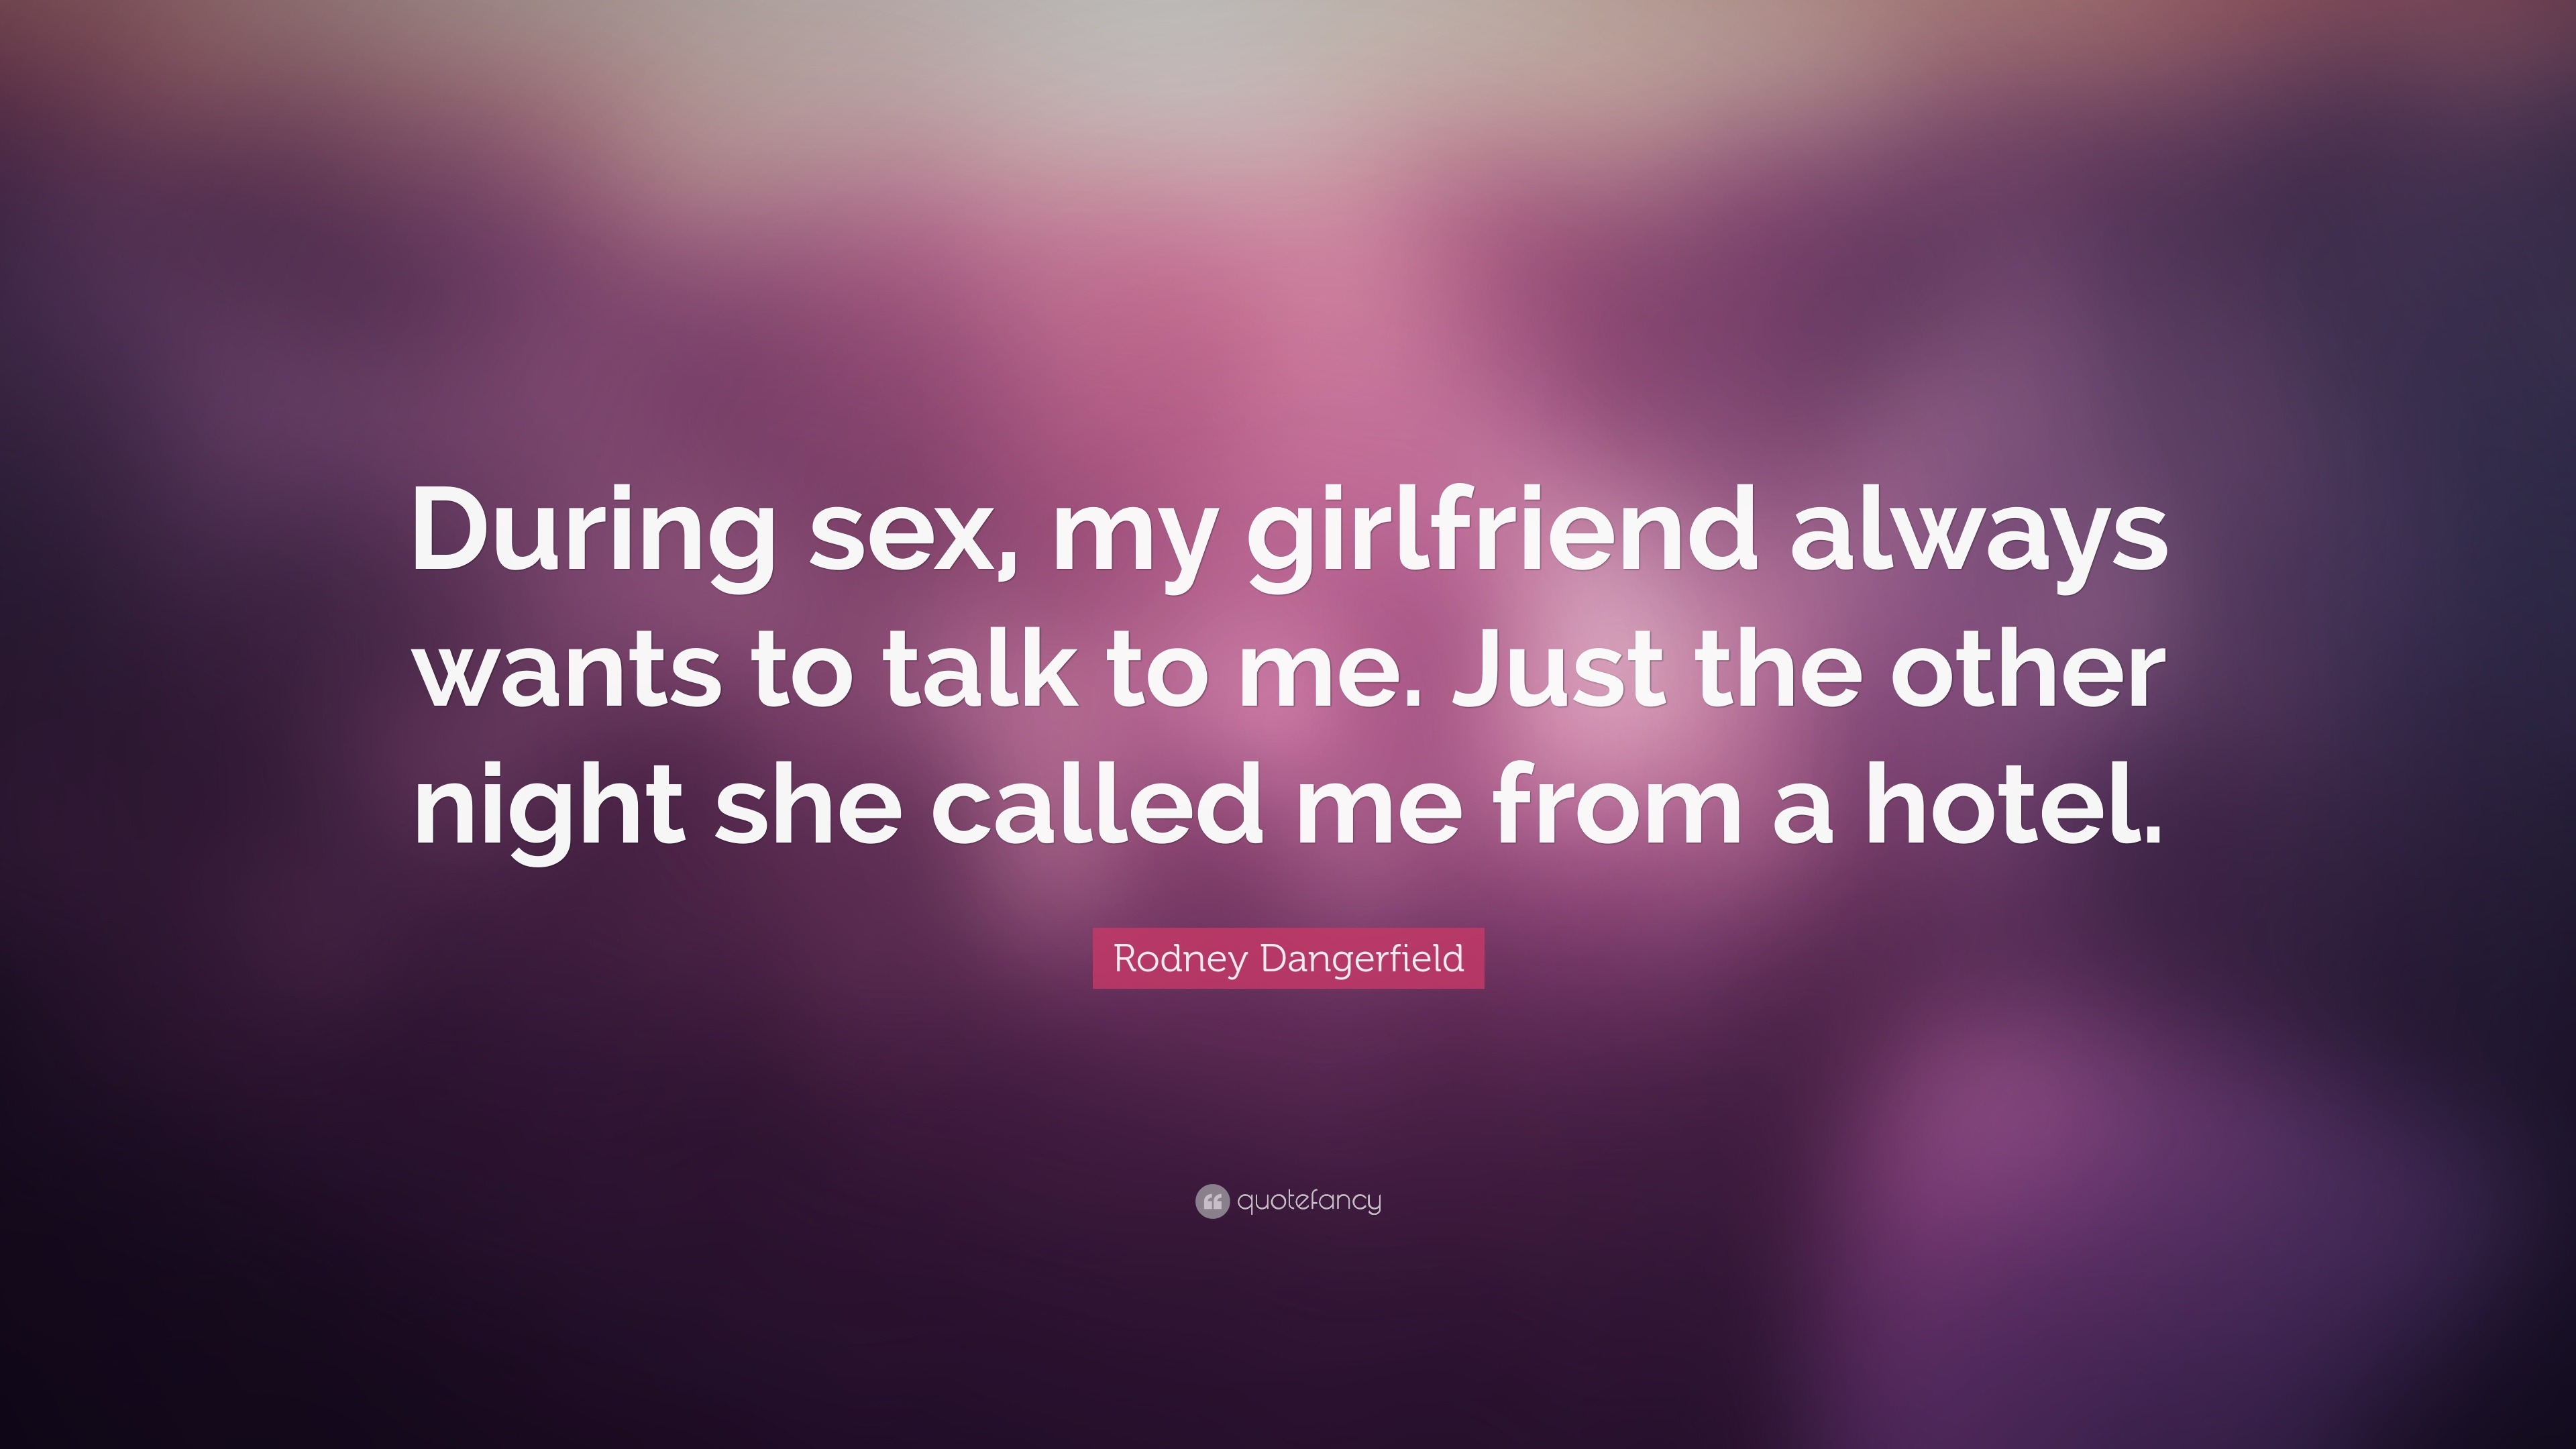 Rodney Dangerfield Quote “During sex, my girlfriend always wants to talk to me picture